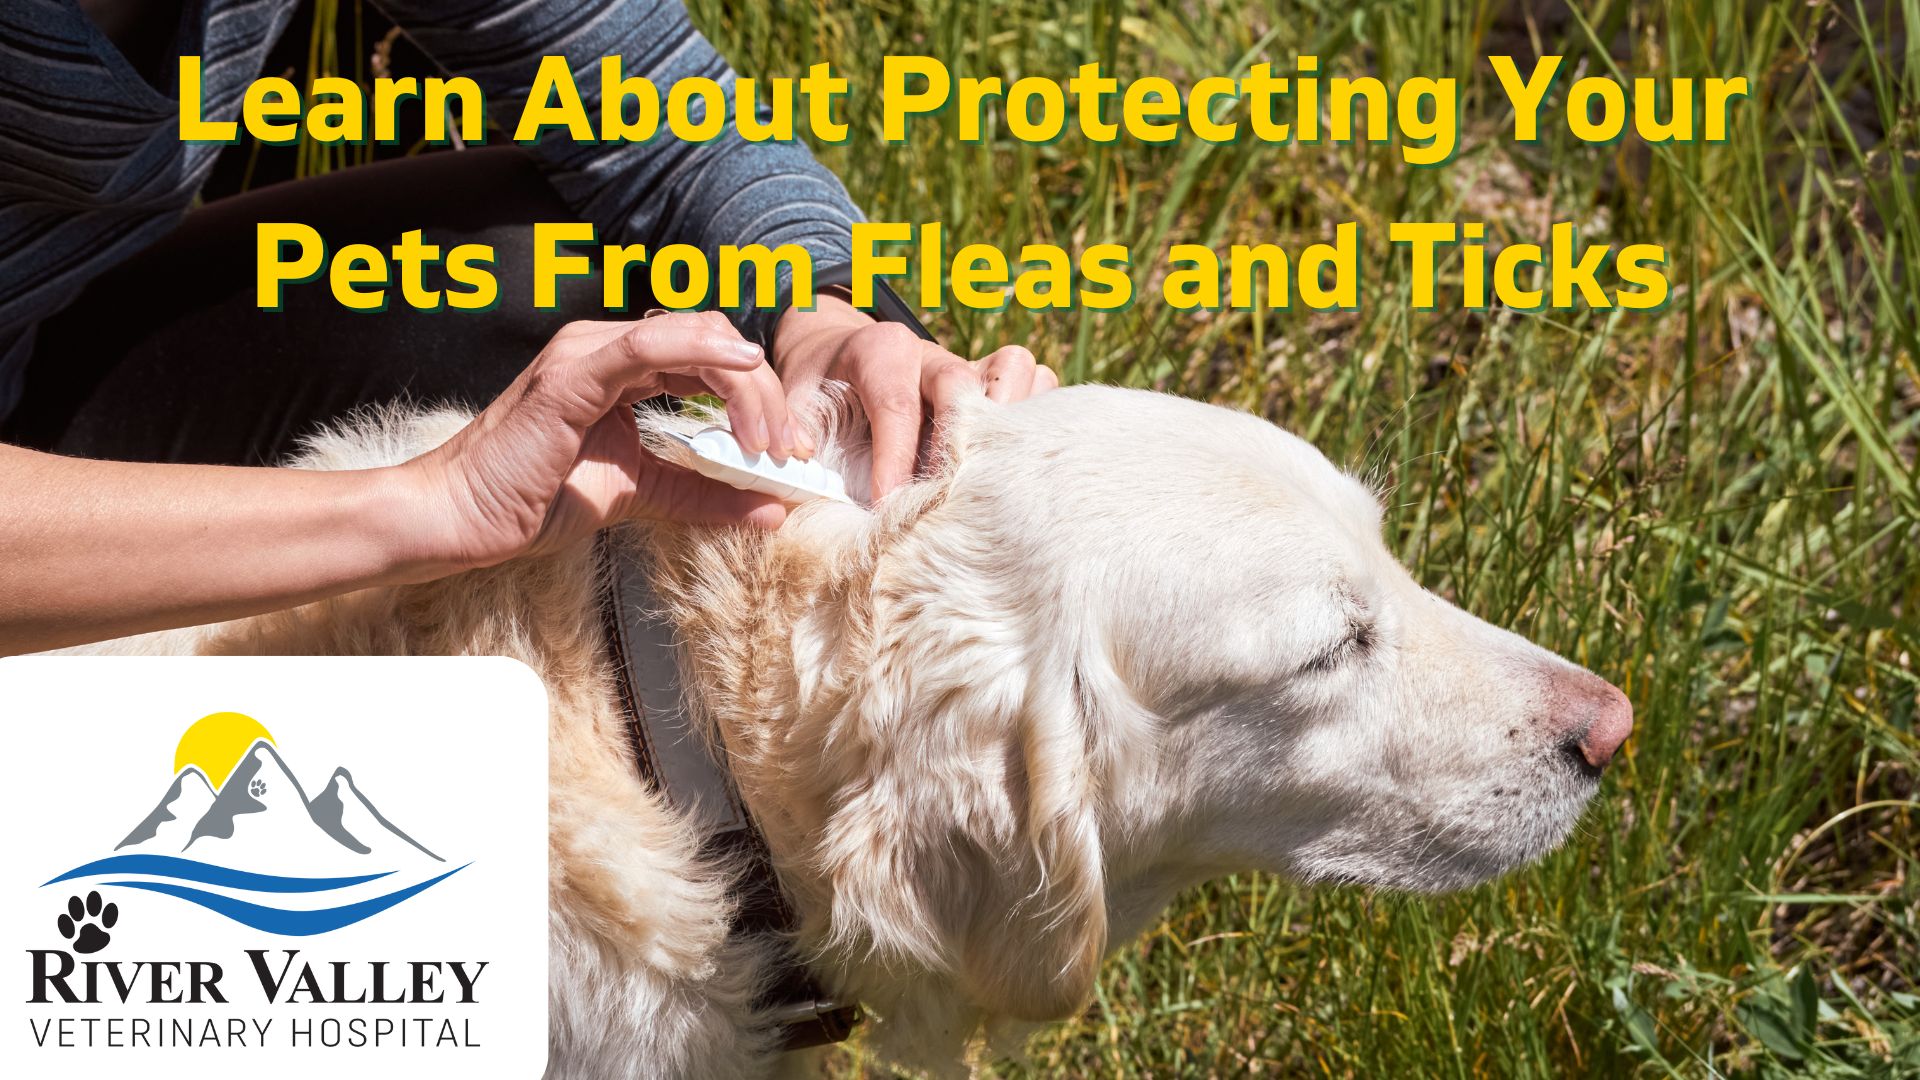 Learn About Protecting Your Pets From Fleas and Ticks